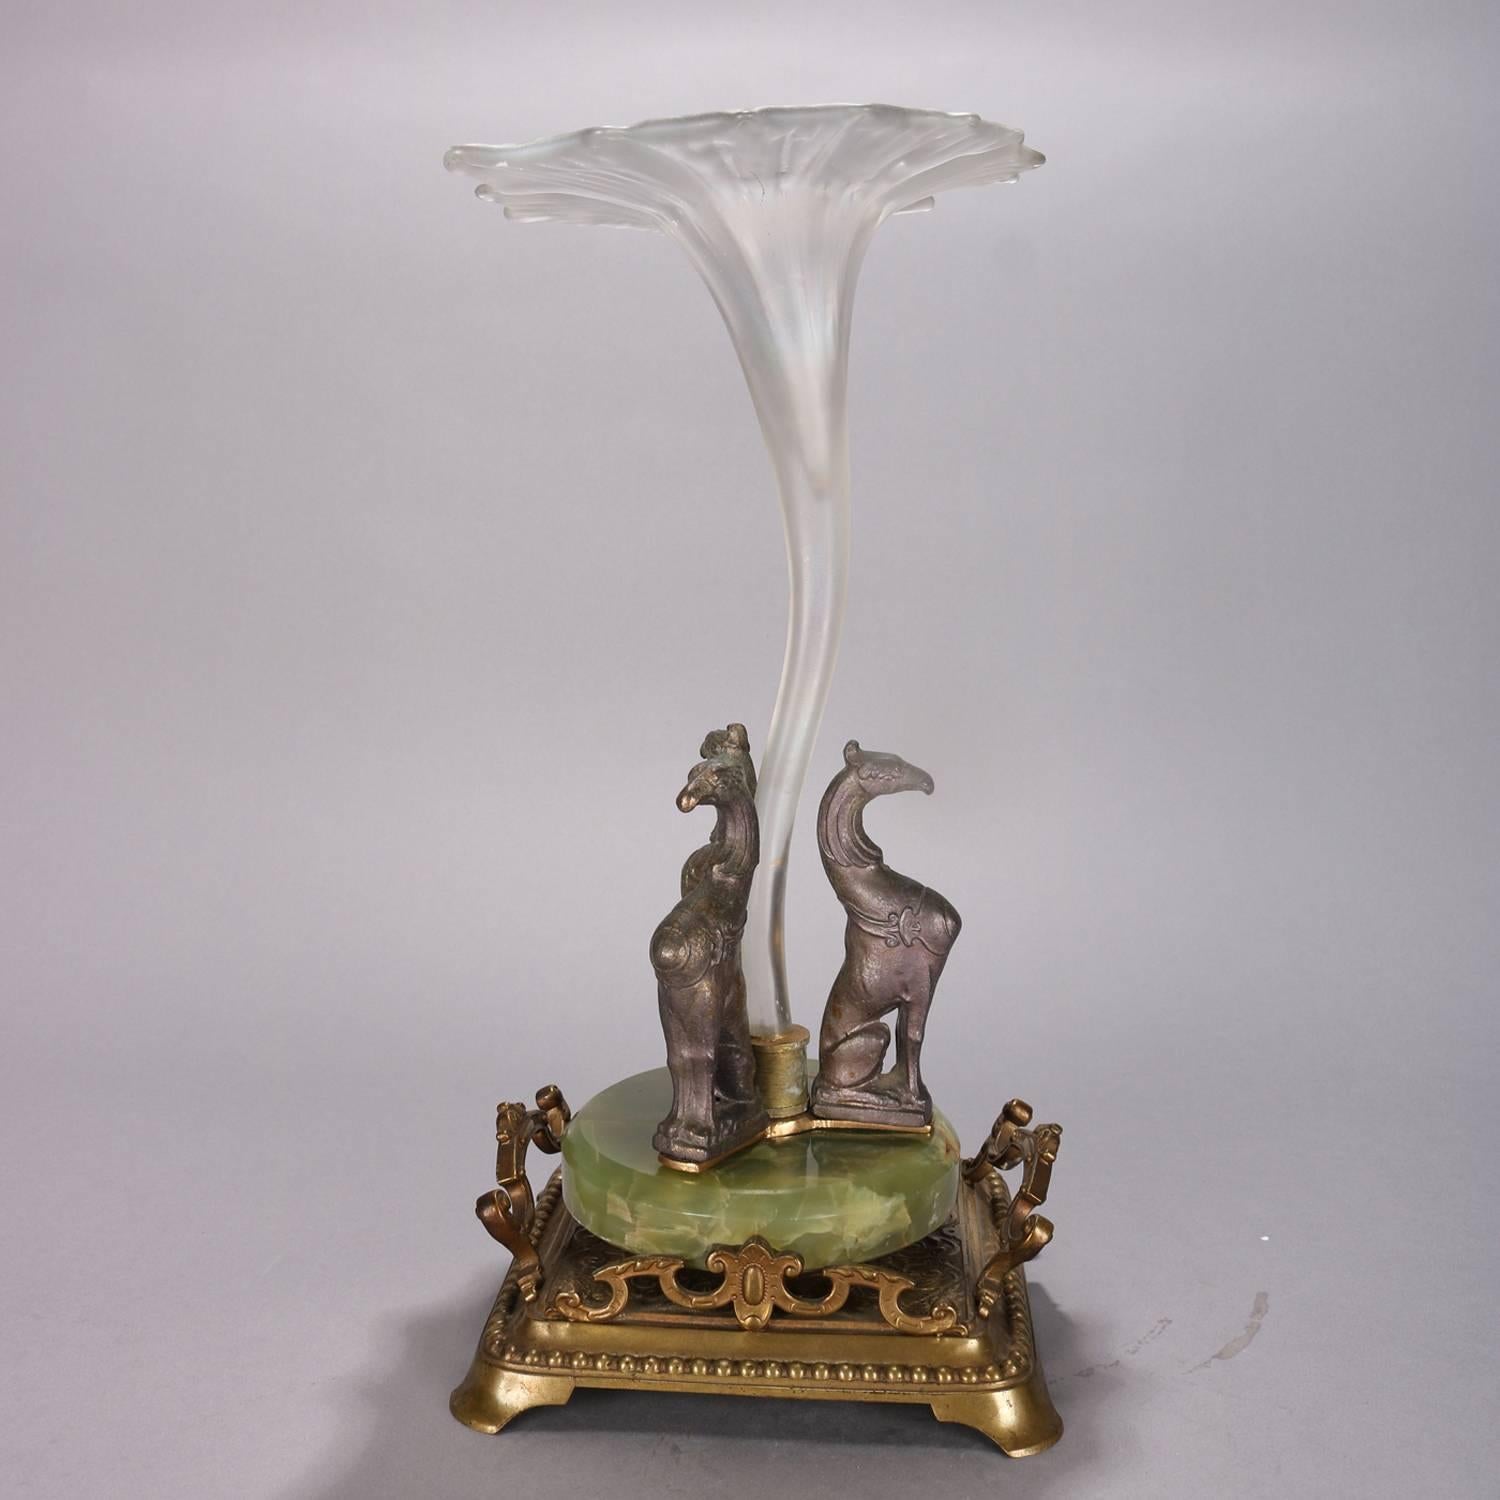 Antique French Victorian figural orchid epergne features gilt and footed base with three griffon sculptures seated atop onyx and supporting mouth blown iridized art glass tulip form vase, circa 1880

Measures: 14.5